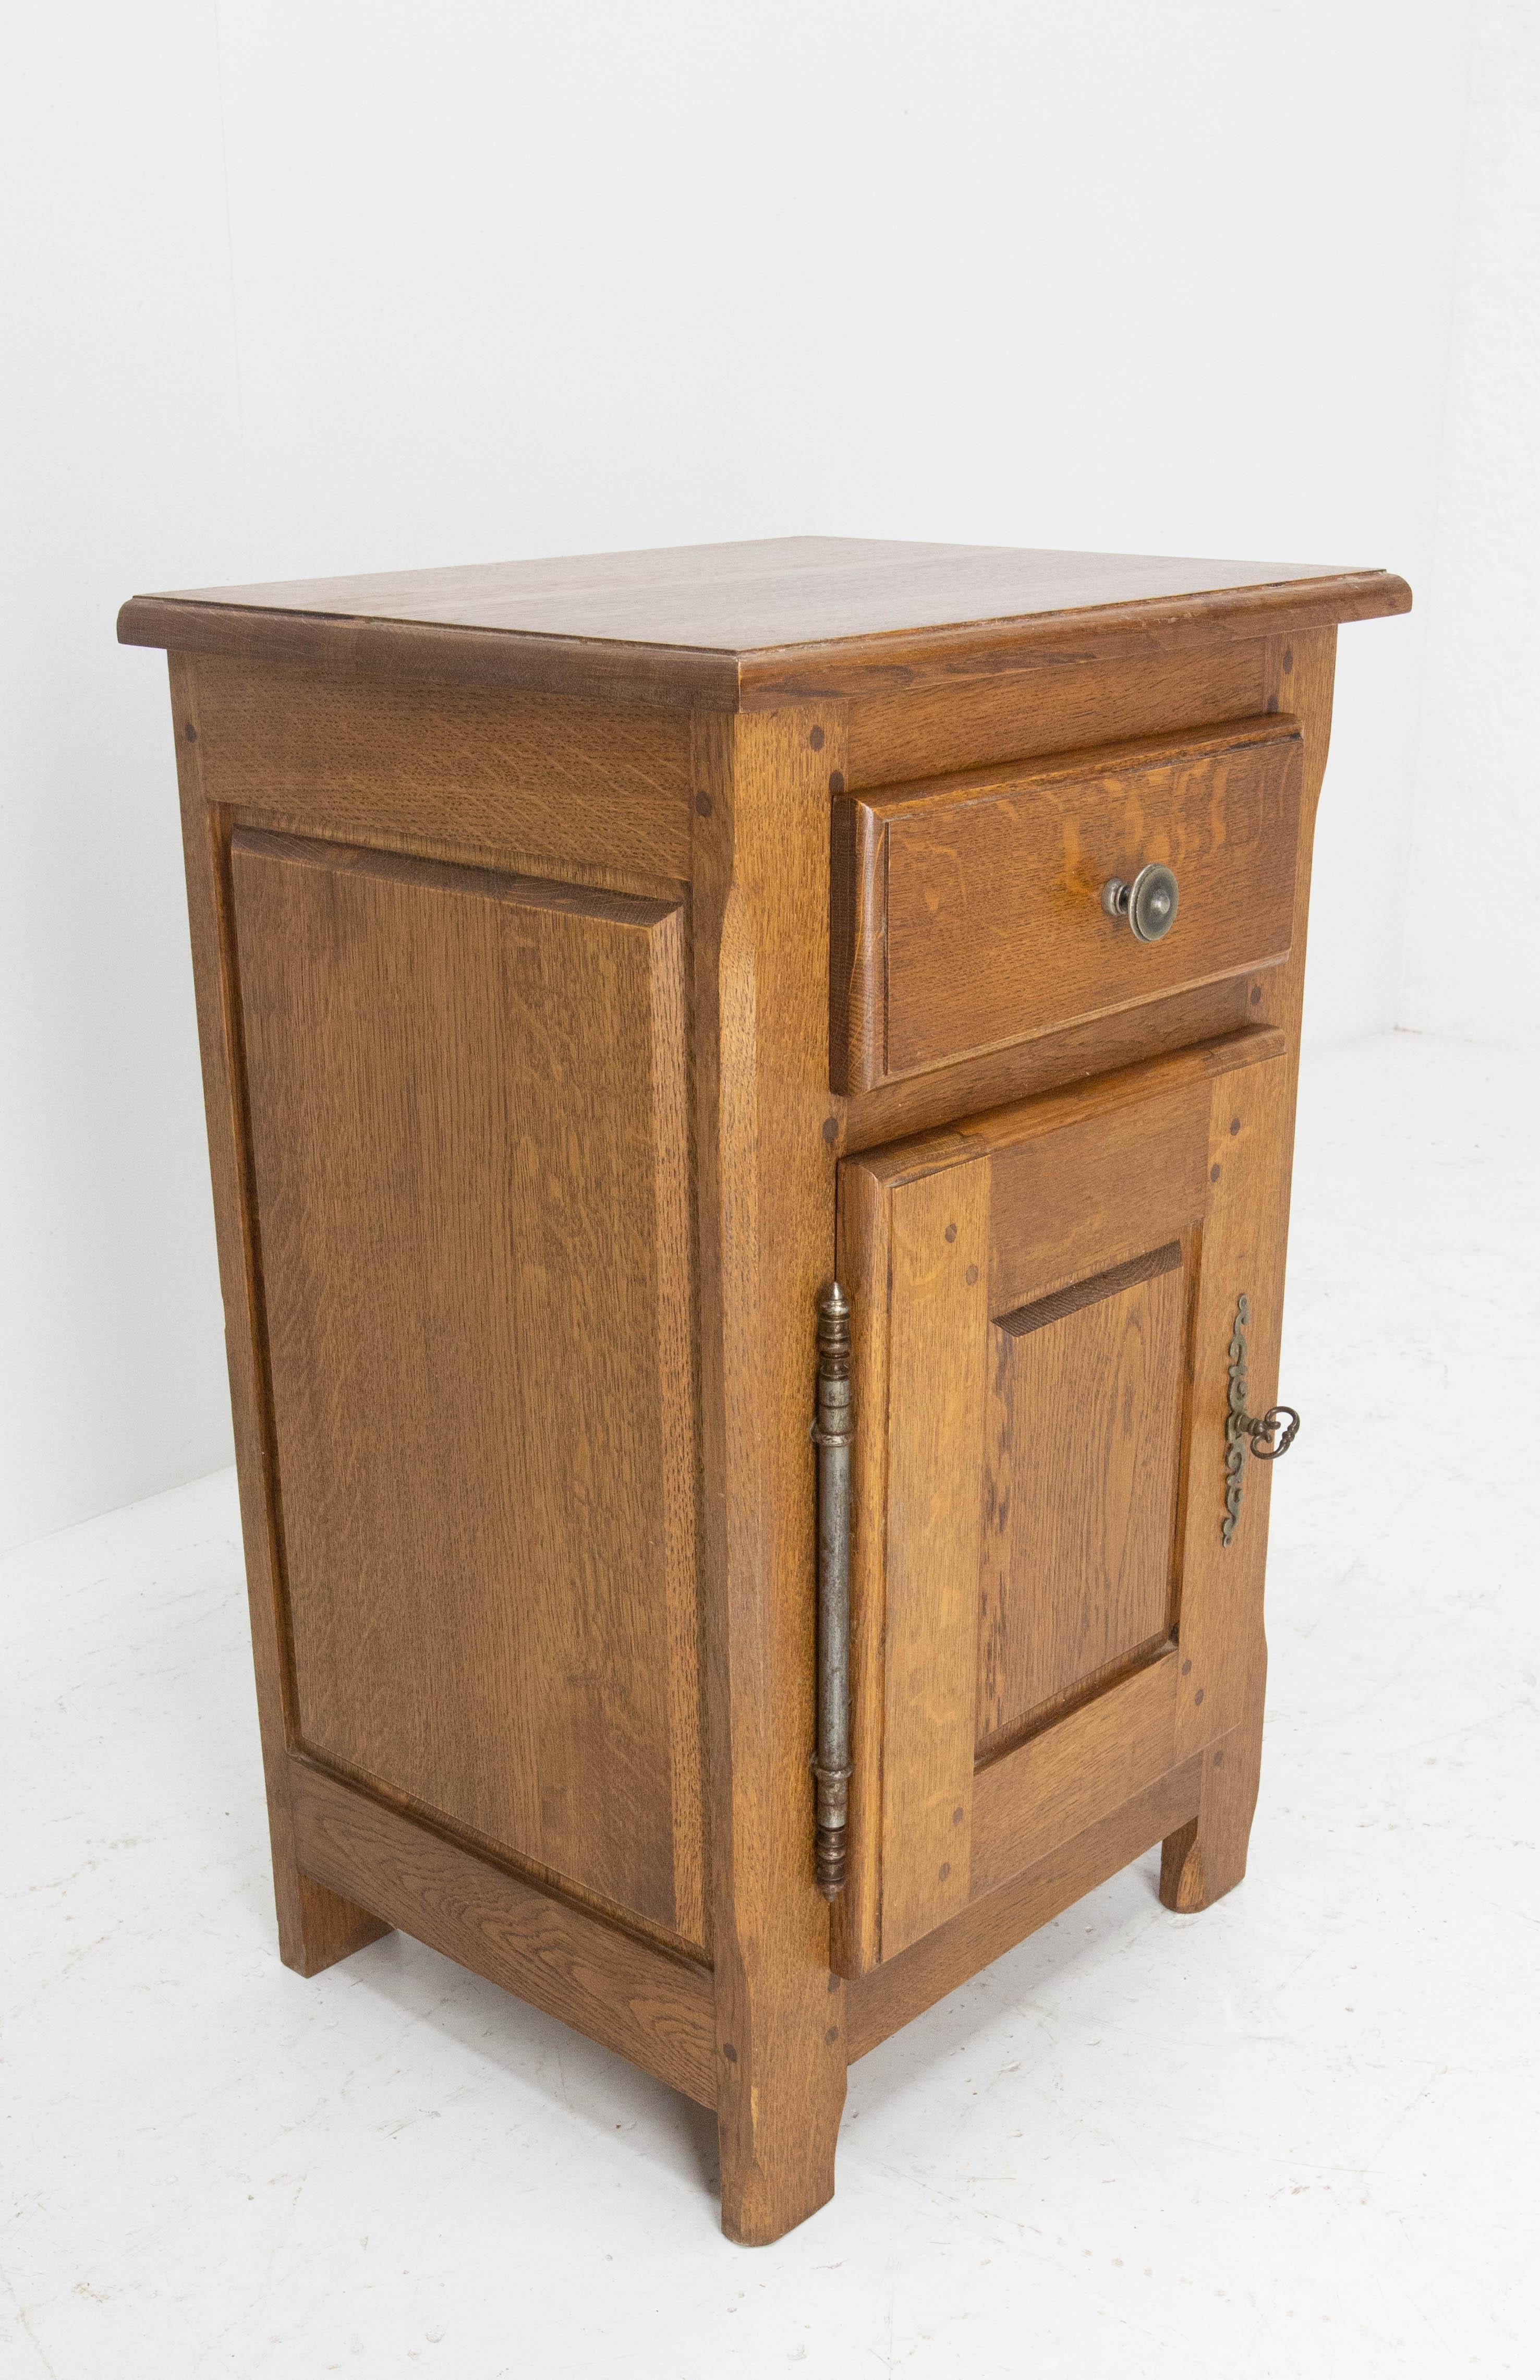 French side cabinet nightstand
Late 20th century
Massive oak bedside table
One drawer and one door
Good condition.

Shipping, poly de 4
L 54 P 46.5 H 81.5 23kg.